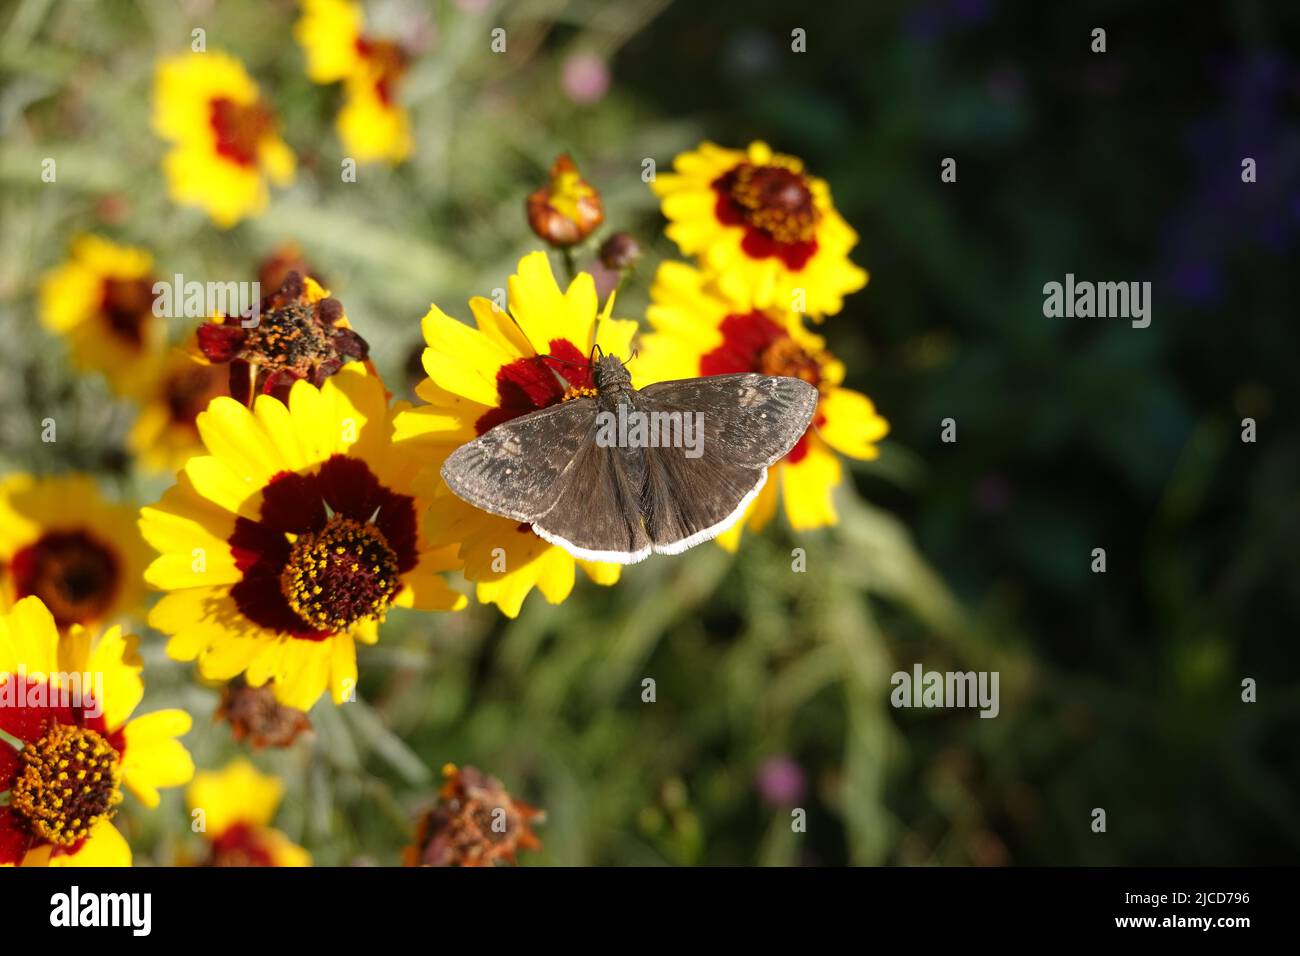 Funereal Duskywing butterfly ( Erynnis funeralis ) on Coreopsis basalis Golden Wave Coreopsis a red and yellow wildflower growing in California garden Stock Photo